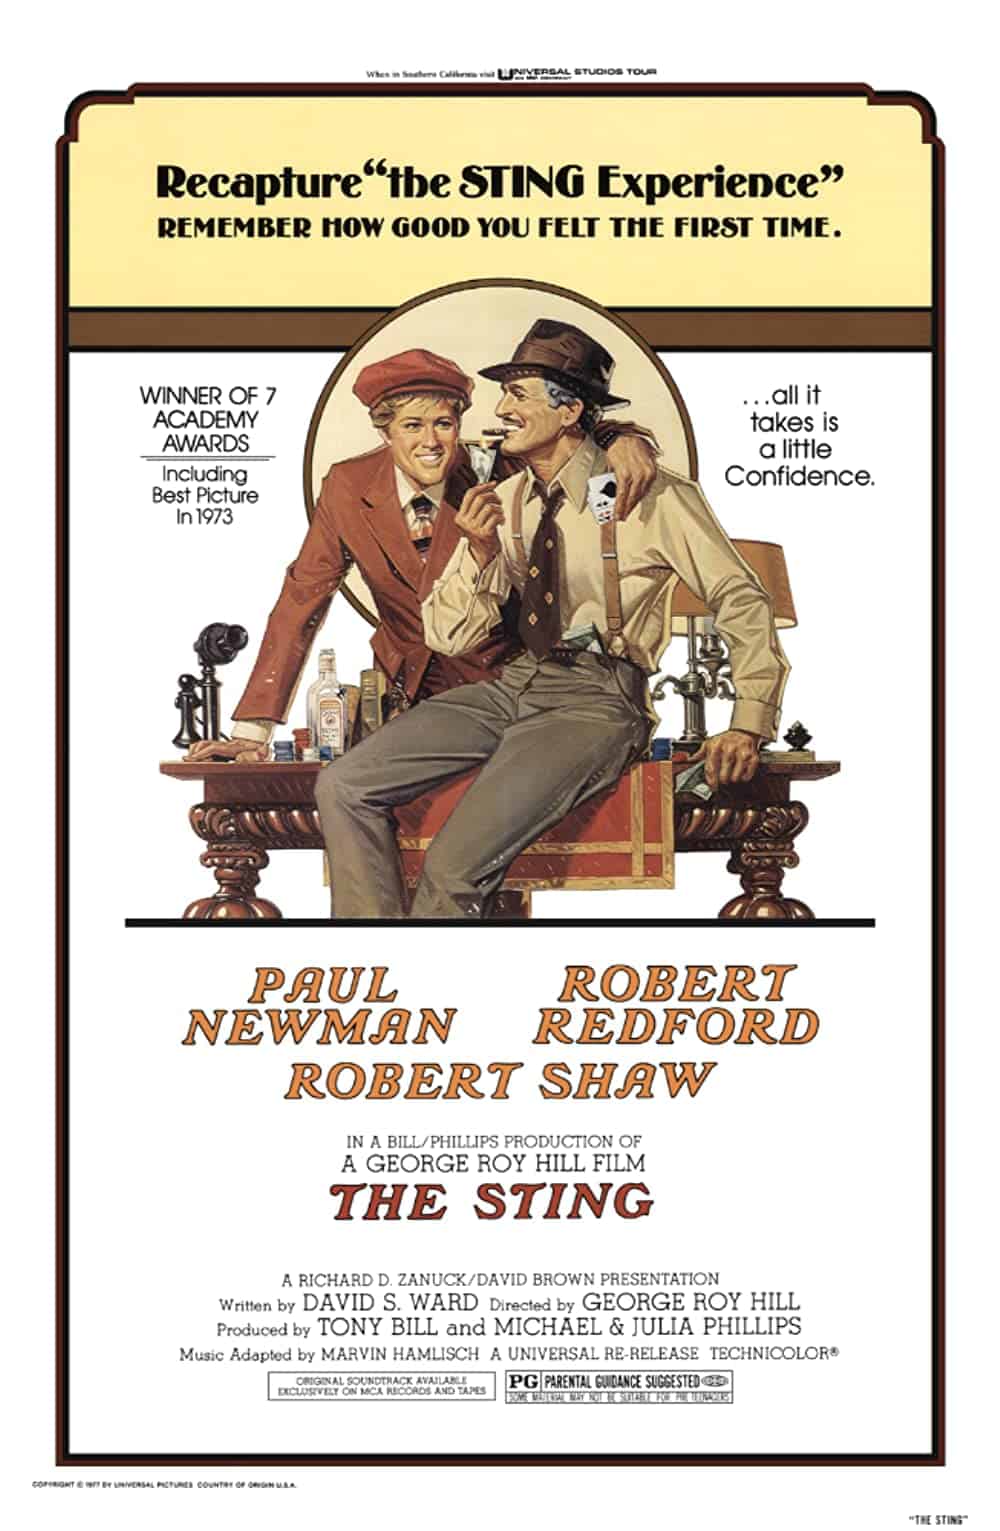 The Sting (1973) 15 Best Con Movies to Add in Your Watchlist